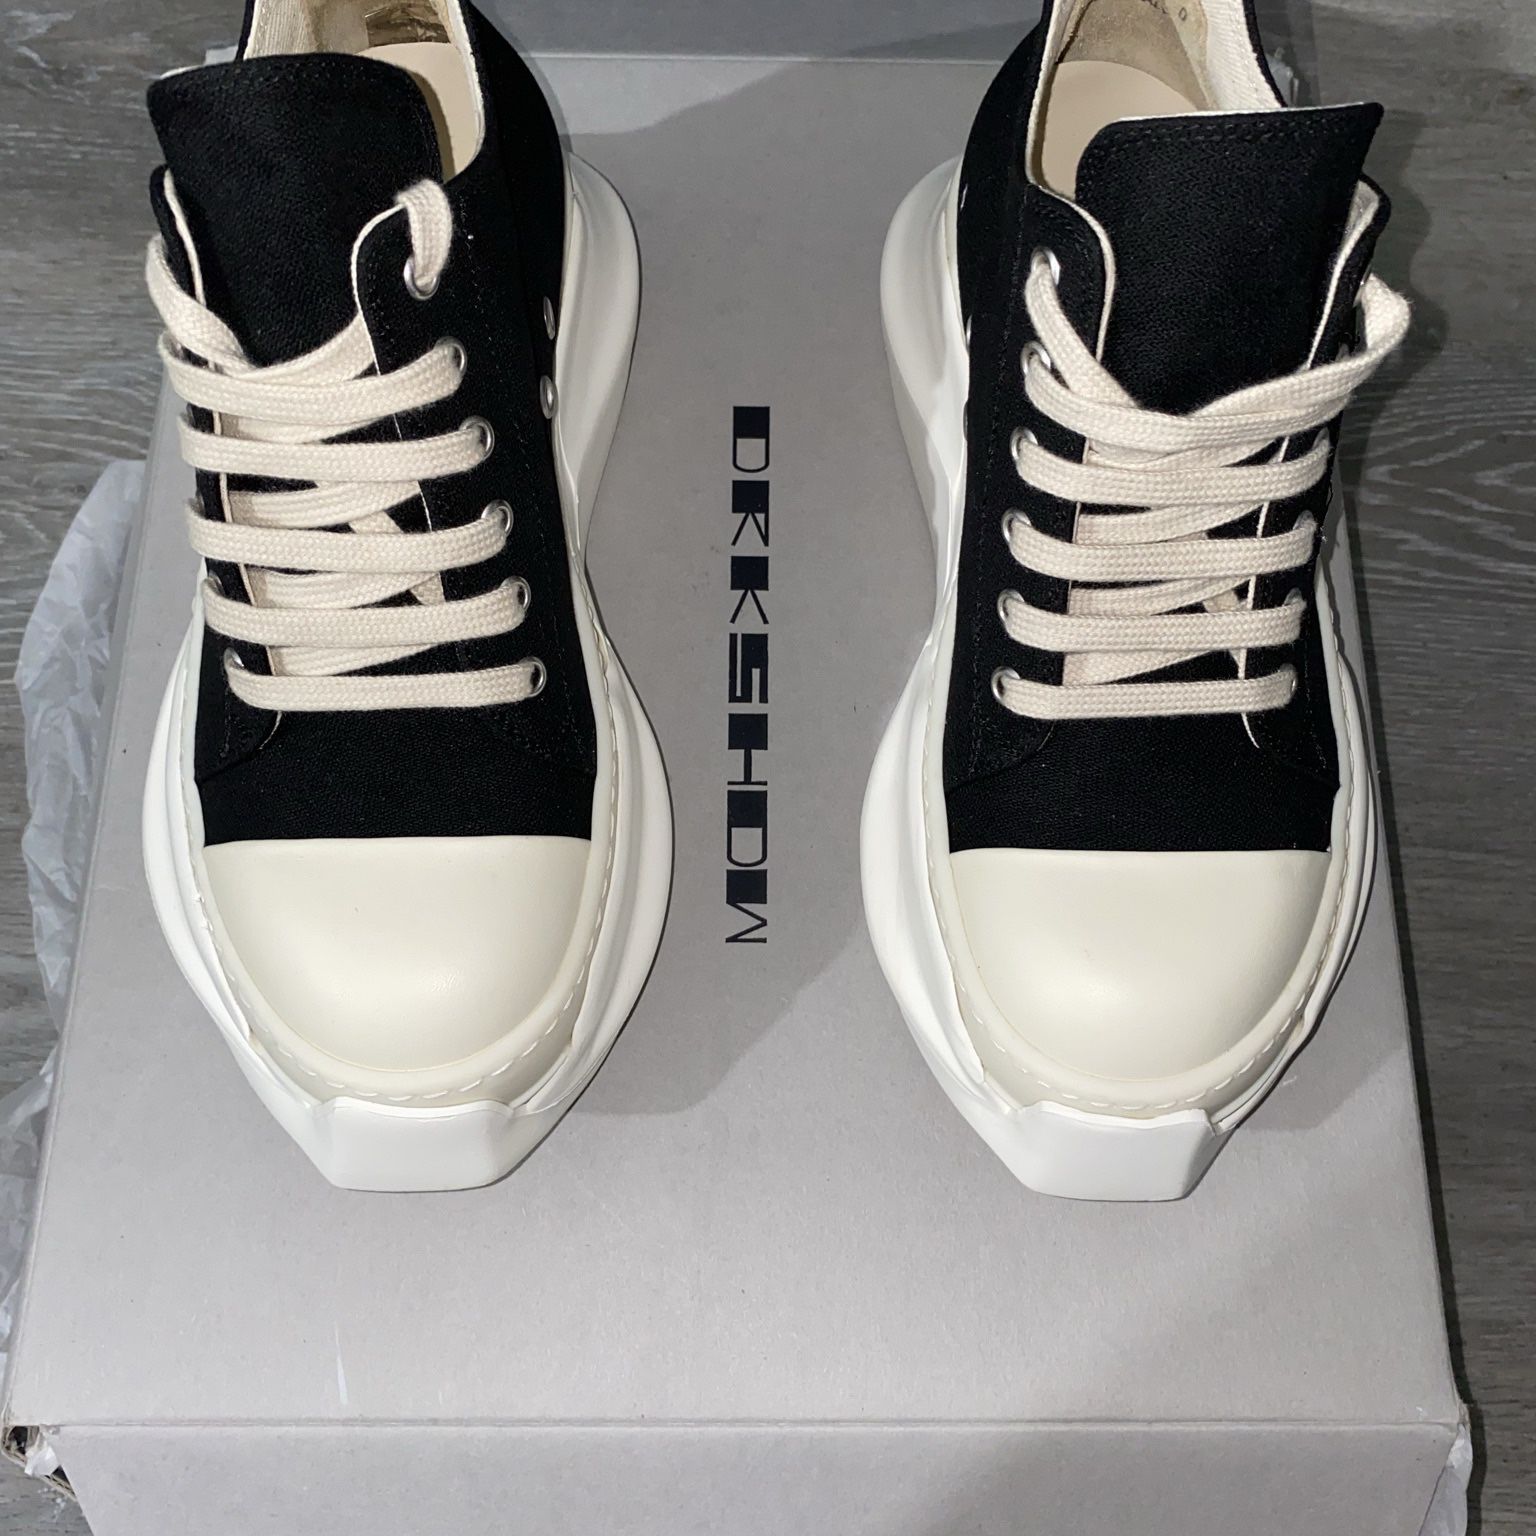 moral passe shuffle Rick Owens Thick Sole Sneakers Black,size 37 for Sale in Swarthmore, PA -  OfferUp